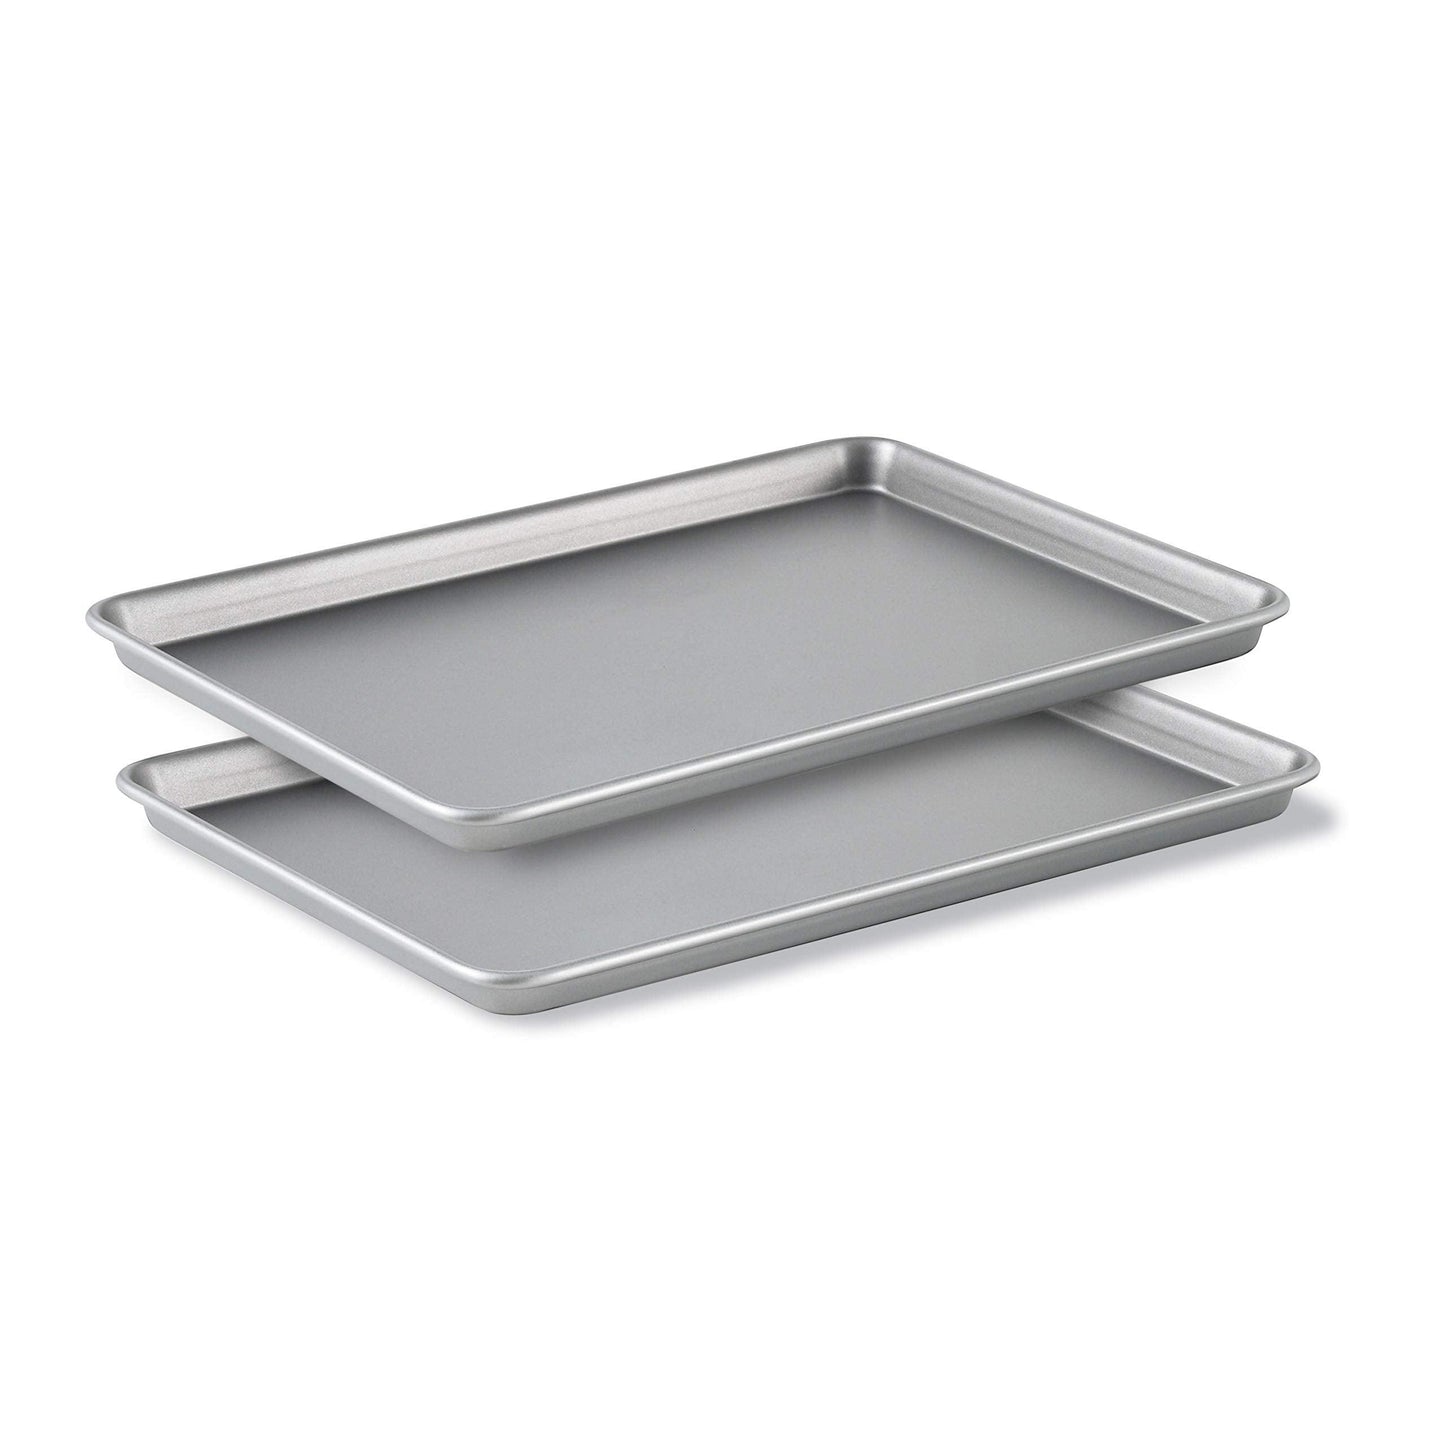 Calphalon Baking Sheets, Nonstick Baking Pans Set for Cookies and Cakes, 12 x 17 in, Set of 2, Silver - CookCave